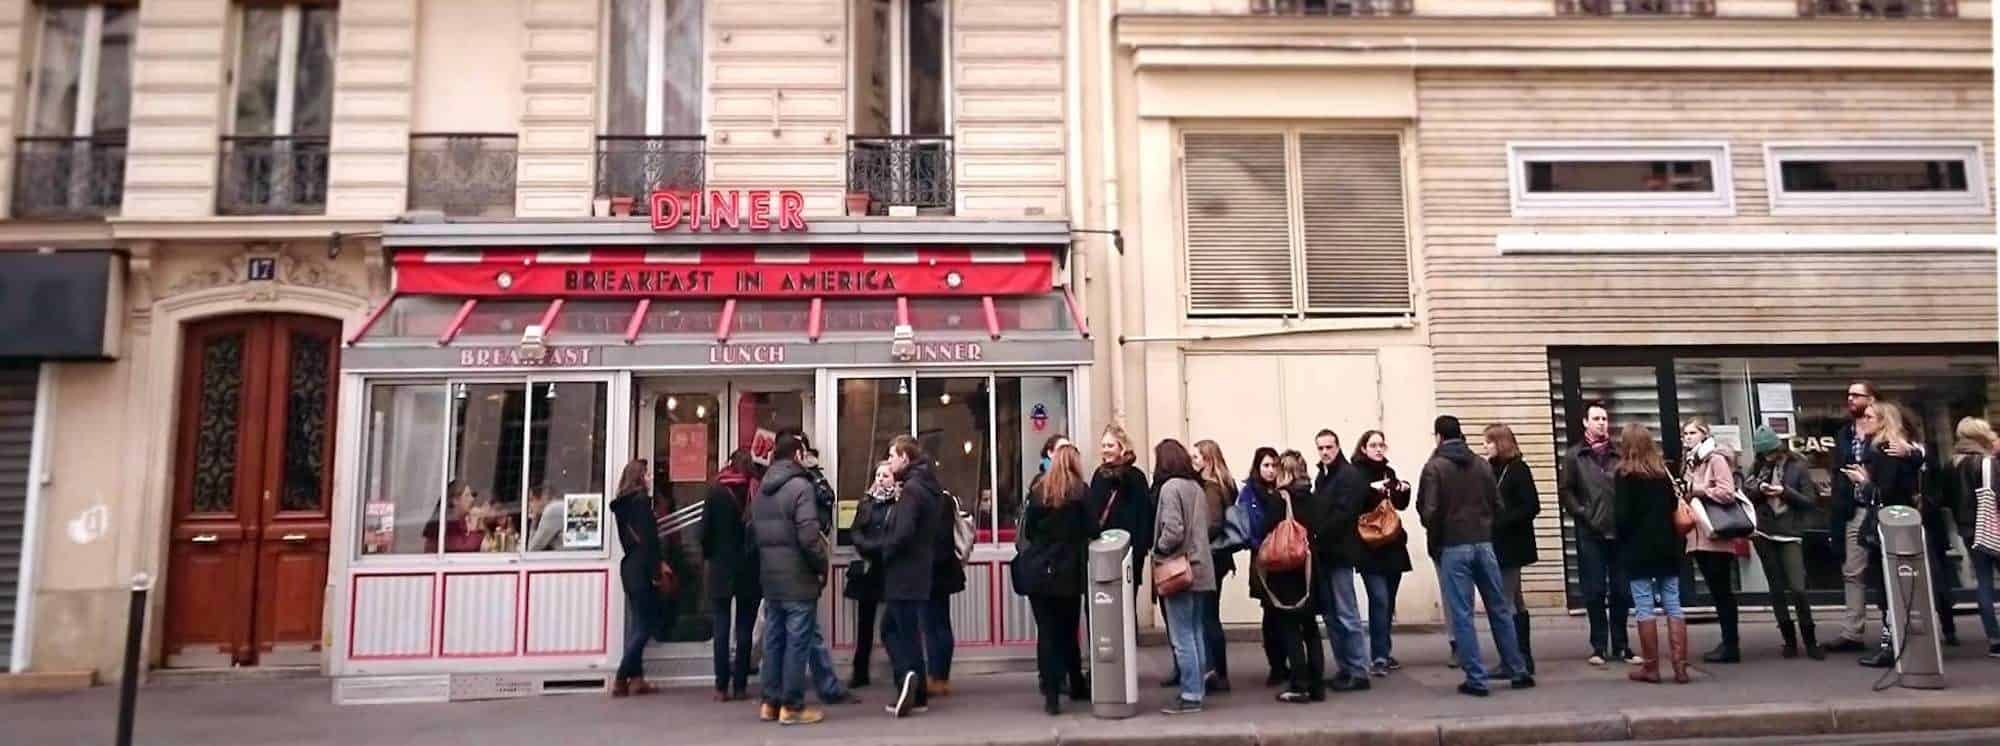 The queue at Breakfast in America diner in Paris on Thanksgiving.